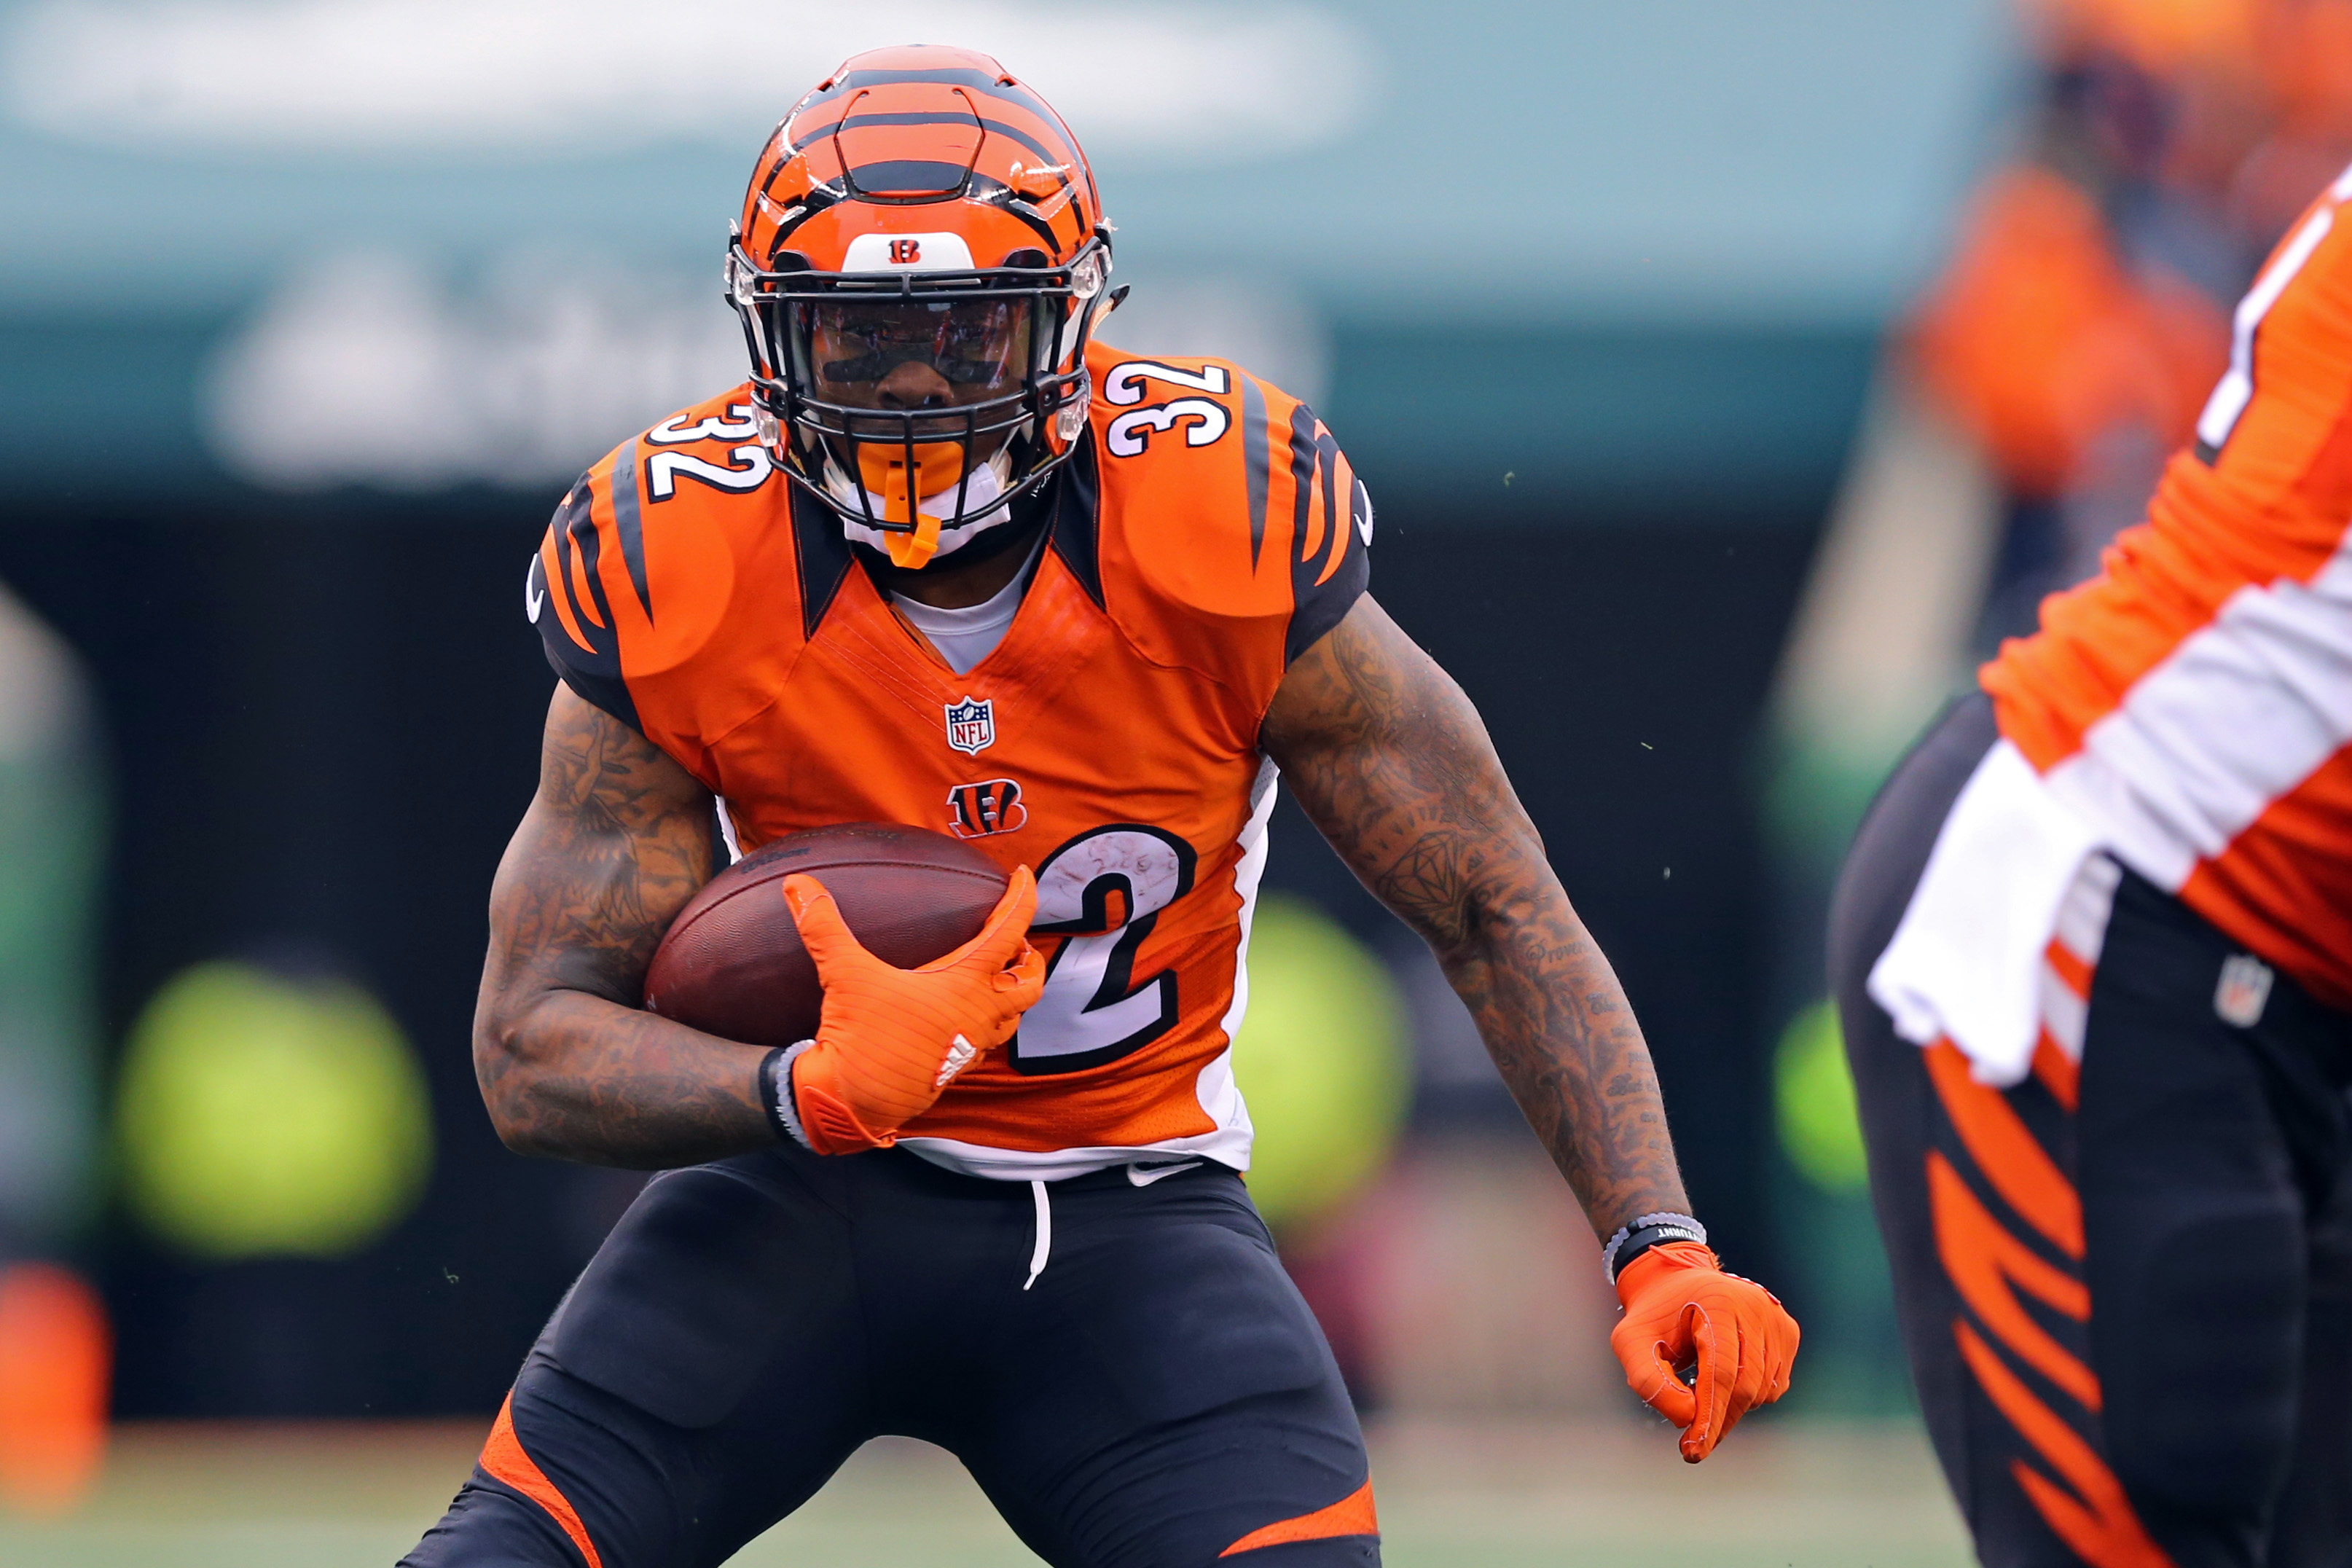 Bengals running back Jeremy Hill say he's the starter